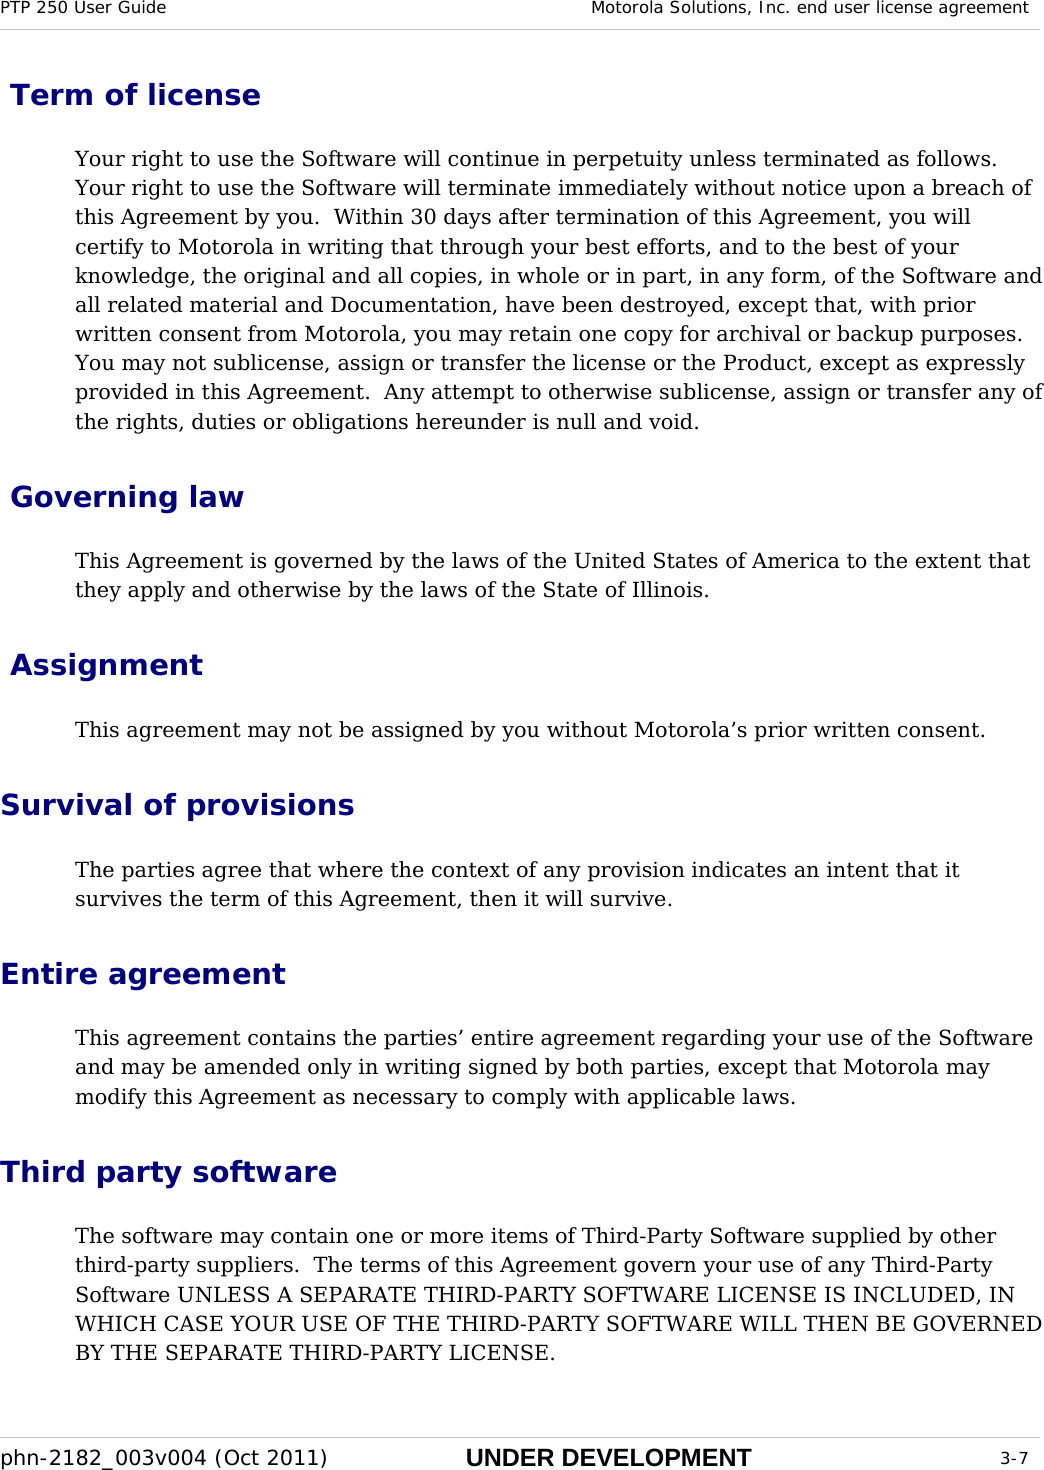 PTP 250 User Guide  Motorola Solutions, Inc. end user license agreement  phn-2182_003v004 (Oct 2011)  UNDER DEVELOPMENT  3-7   Term of license Your right to use the Software will continue in perpetuity unless terminated as follows. Your right to use the Software will terminate immediately without notice upon a breach of this Agreement by you.  Within 30 days after termination of this Agreement, you will certify to Motorola in writing that through your best efforts, and to the best of your knowledge, the original and all copies, in whole or in part, in any form, of the Software and all related material and Documentation, have been destroyed, except that, with prior written consent from Motorola, you may retain one copy for archival or backup purposes. You may not sublicense, assign or transfer the license or the Product, except as expressly provided in this Agreement.  Any attempt to otherwise sublicense, assign or transfer any of the rights, duties or obligations hereunder is null and void.  Governing law This Agreement is governed by the laws of the United States of America to the extent that they apply and otherwise by the laws of the State of Illinois.  Assignment This agreement may not be assigned by you without Motorola’s prior written consent. Survival of provisions The parties agree that where the context of any provision indicates an intent that it survives the term of this Agreement, then it will survive. Entire agreement This agreement contains the parties’ entire agreement regarding your use of the Software and may be amended only in writing signed by both parties, except that Motorola may modify this Agreement as necessary to comply with applicable laws. Third party software The software may contain one or more items of Third-Party Software supplied by other third-party suppliers.  The terms of this Agreement govern your use of any Third-Party Software UNLESS A SEPARATE THIRD-PARTY SOFTWARE LICENSE IS INCLUDED, IN WHICH CASE YOUR USE OF THE THIRD-PARTY SOFTWARE WILL THEN BE GOVERNED BY THE SEPARATE THIRD-PARTY LICENSE.  